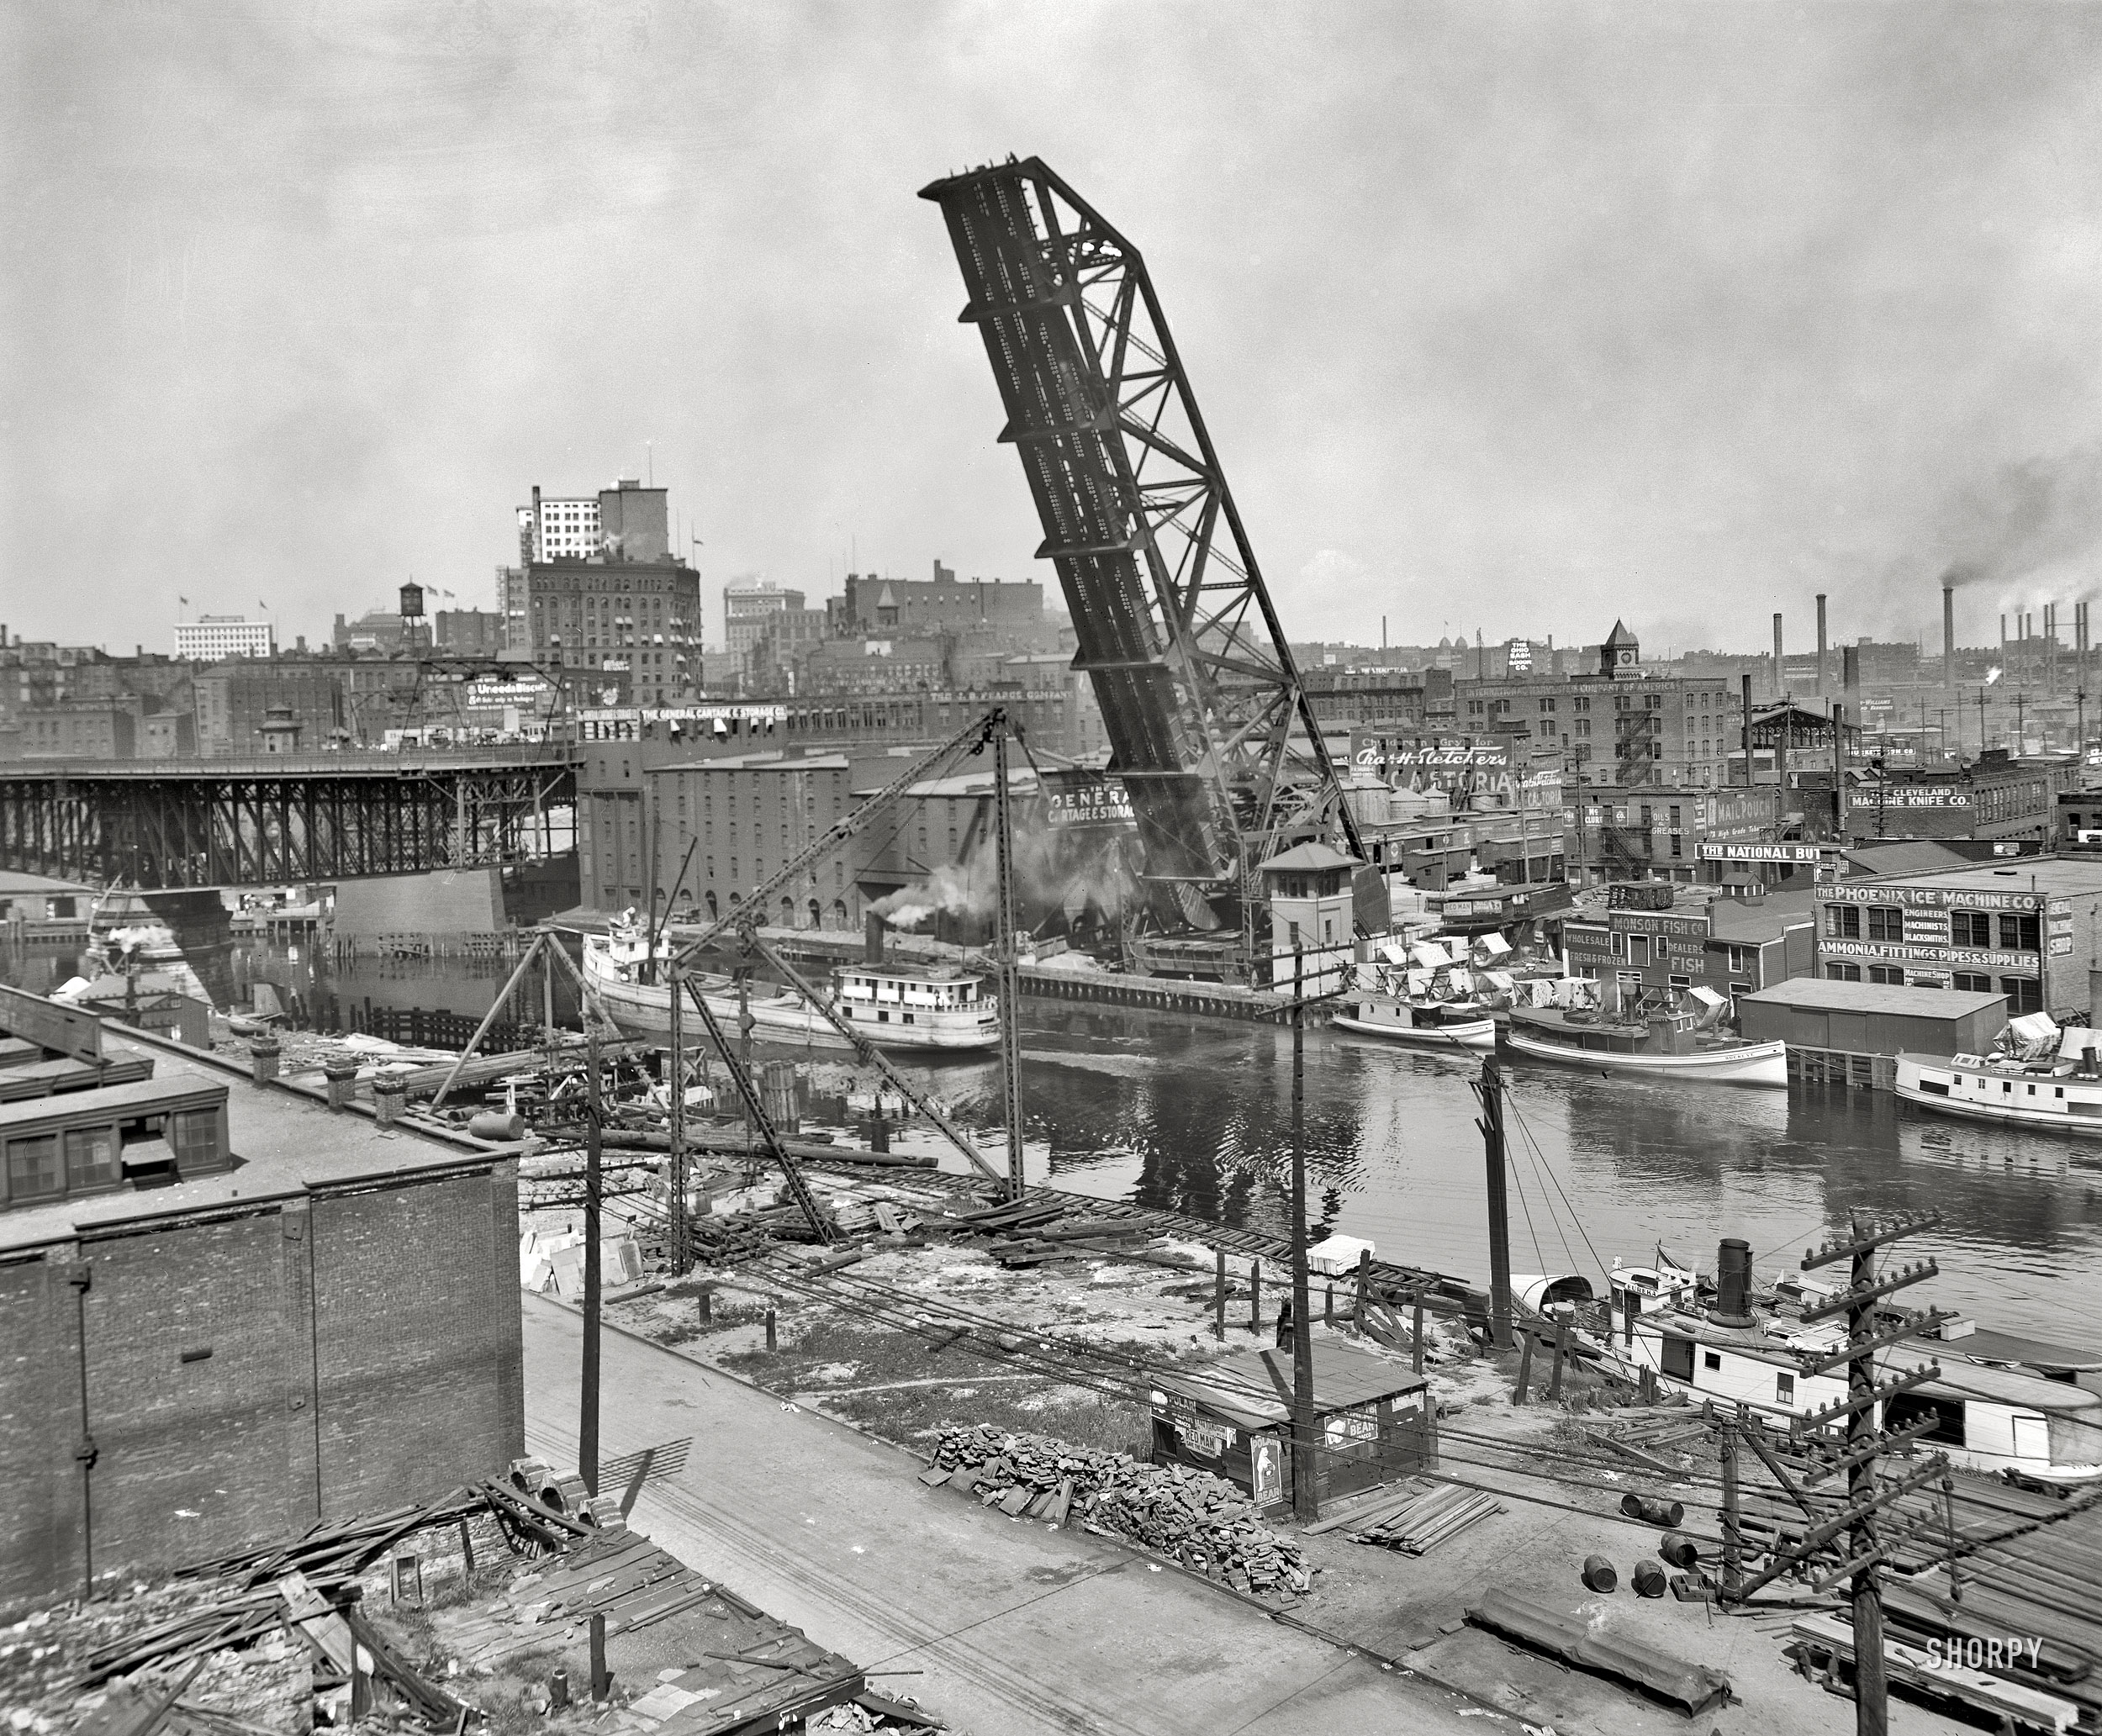 Cleveland, Ohio, circa 1910. "Lift bridge and Superior Avenue viaduct, Cuyahoga River." 8x10 inch dry plate glass negative, Detroit Publishing Co. View full size.